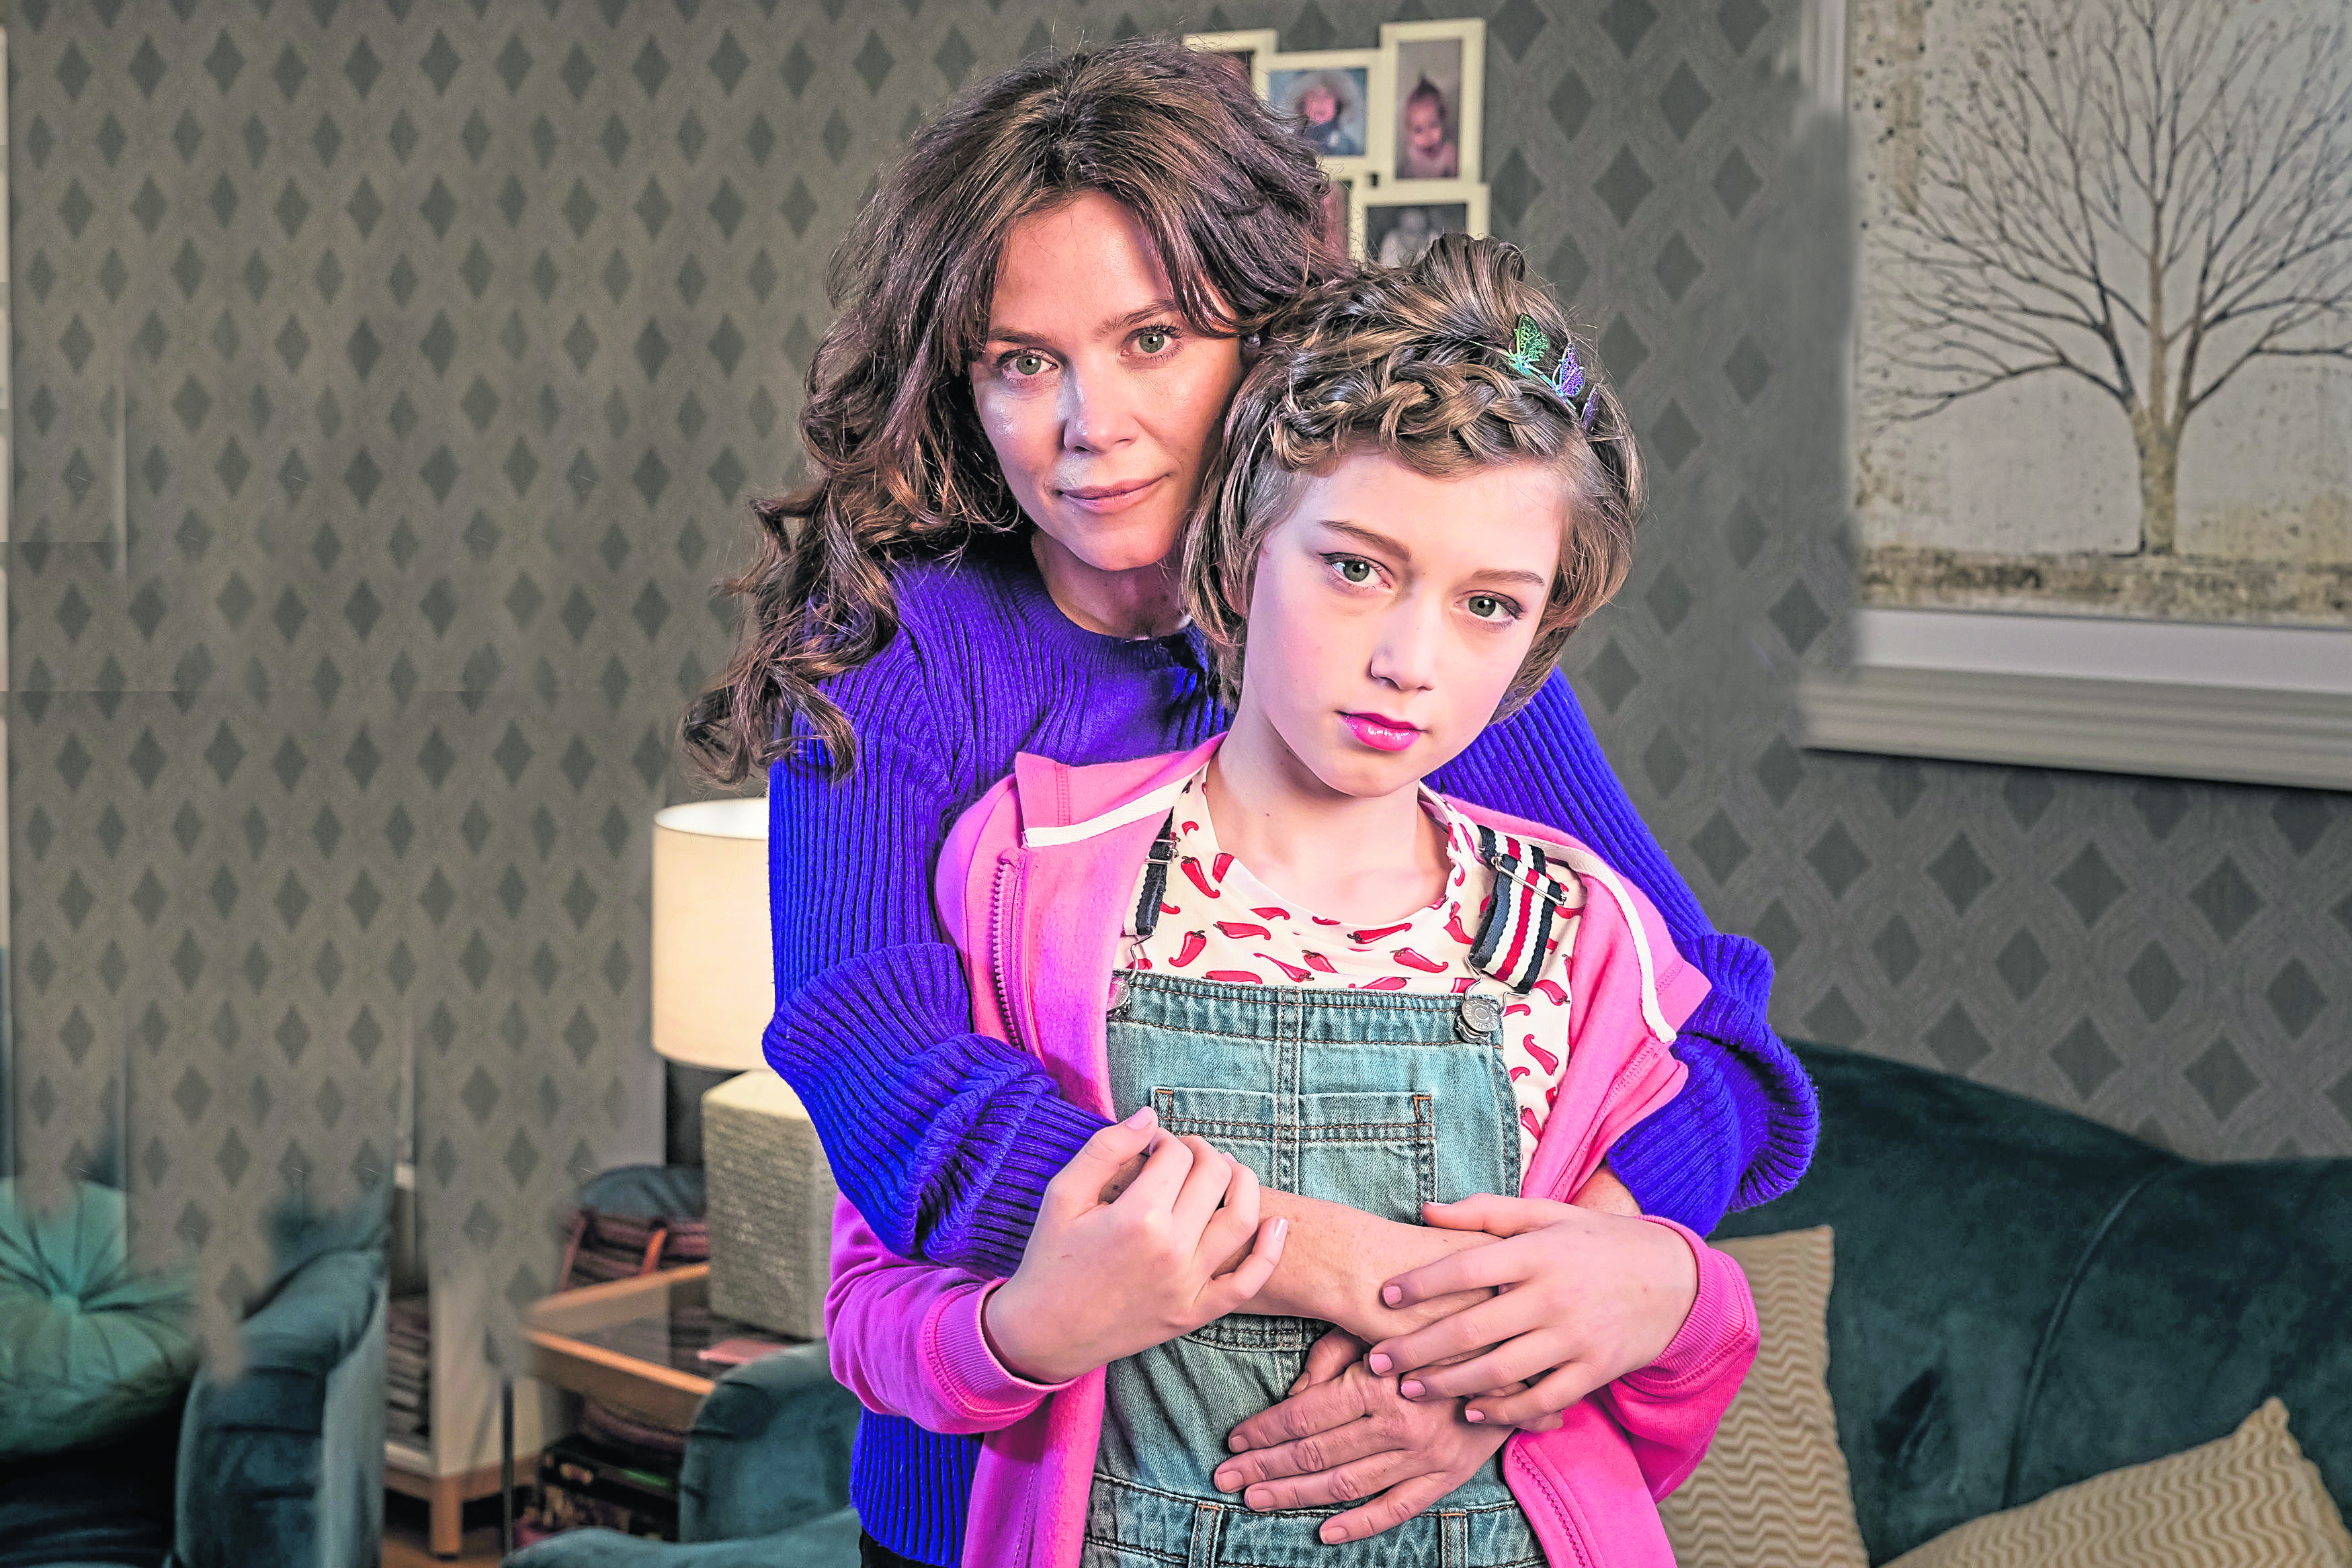 Anna Friel as Vicky Duffy and Callum Booth-Ford as Max in Butterfly, an ITV drama about Max who identified as transgender from a young age.